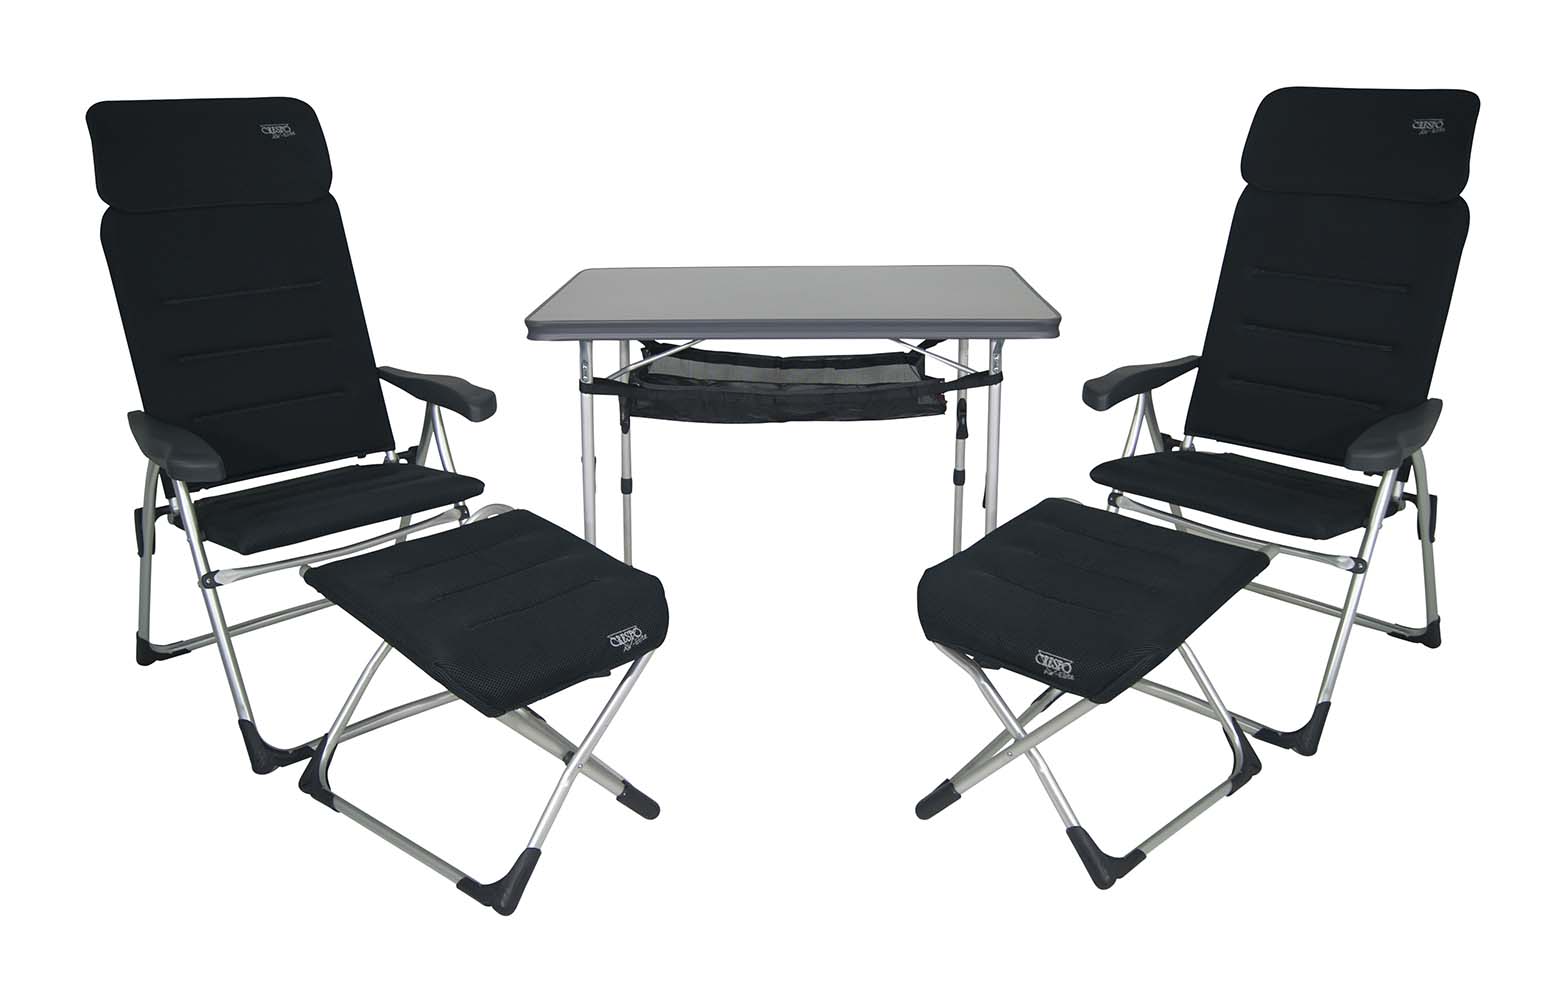 1104959 A set consisting of 2 AA-213 Air-Elite Compact chairs with corresponding footrests, a table AL-246 with storage net, and a storage case. A very compact and ideal set for 2 people. The set is easy to carry in a very compact manner, including a storage case. In total, the set is foldable to a thickness of only 26 cm.